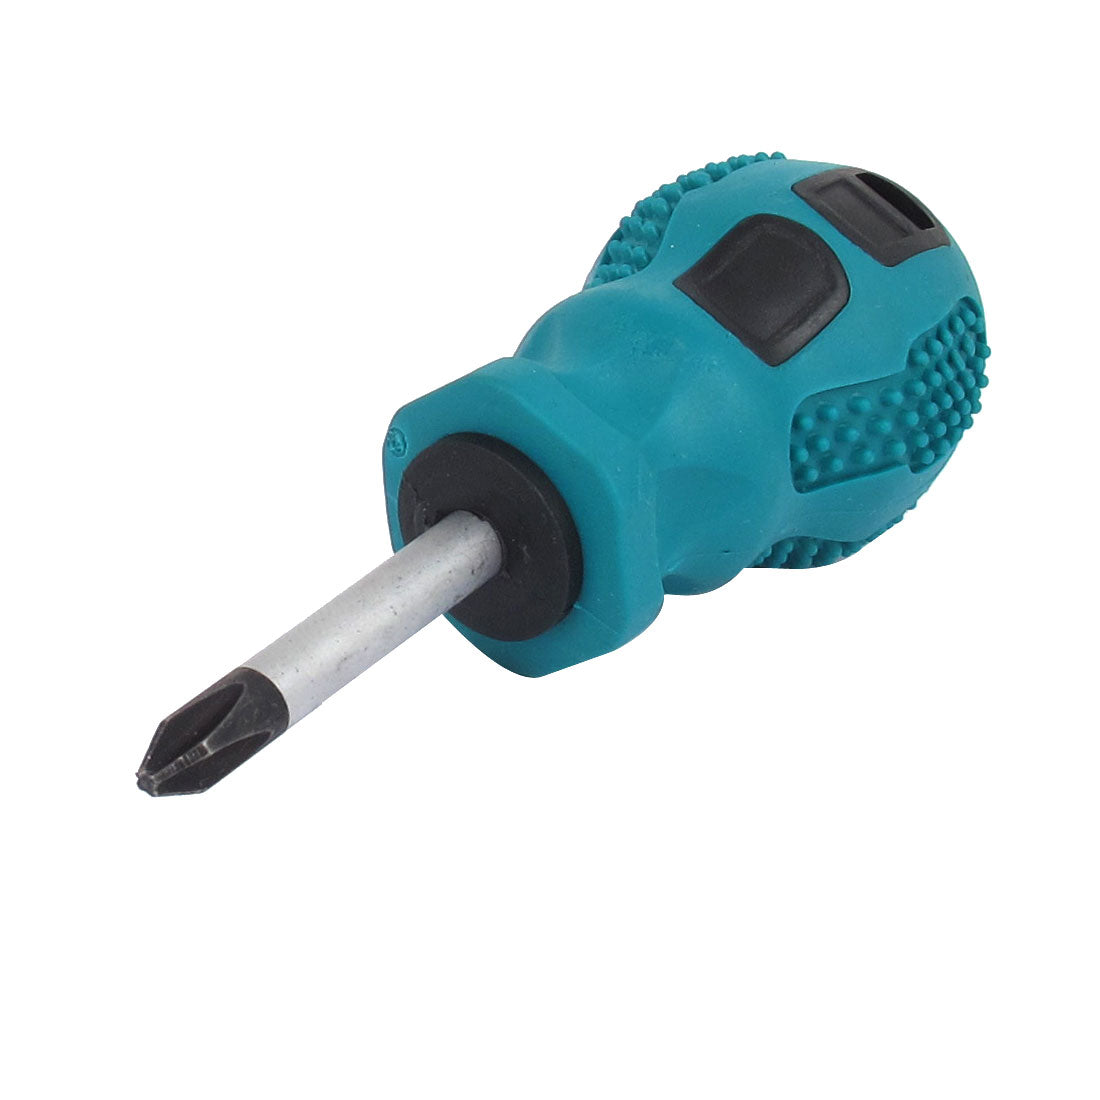 uxcell Uxcell 6mmx38mm Shaft 6mm Magnetic Tip Plastic Grip Crosshead Phillips Screwdriver